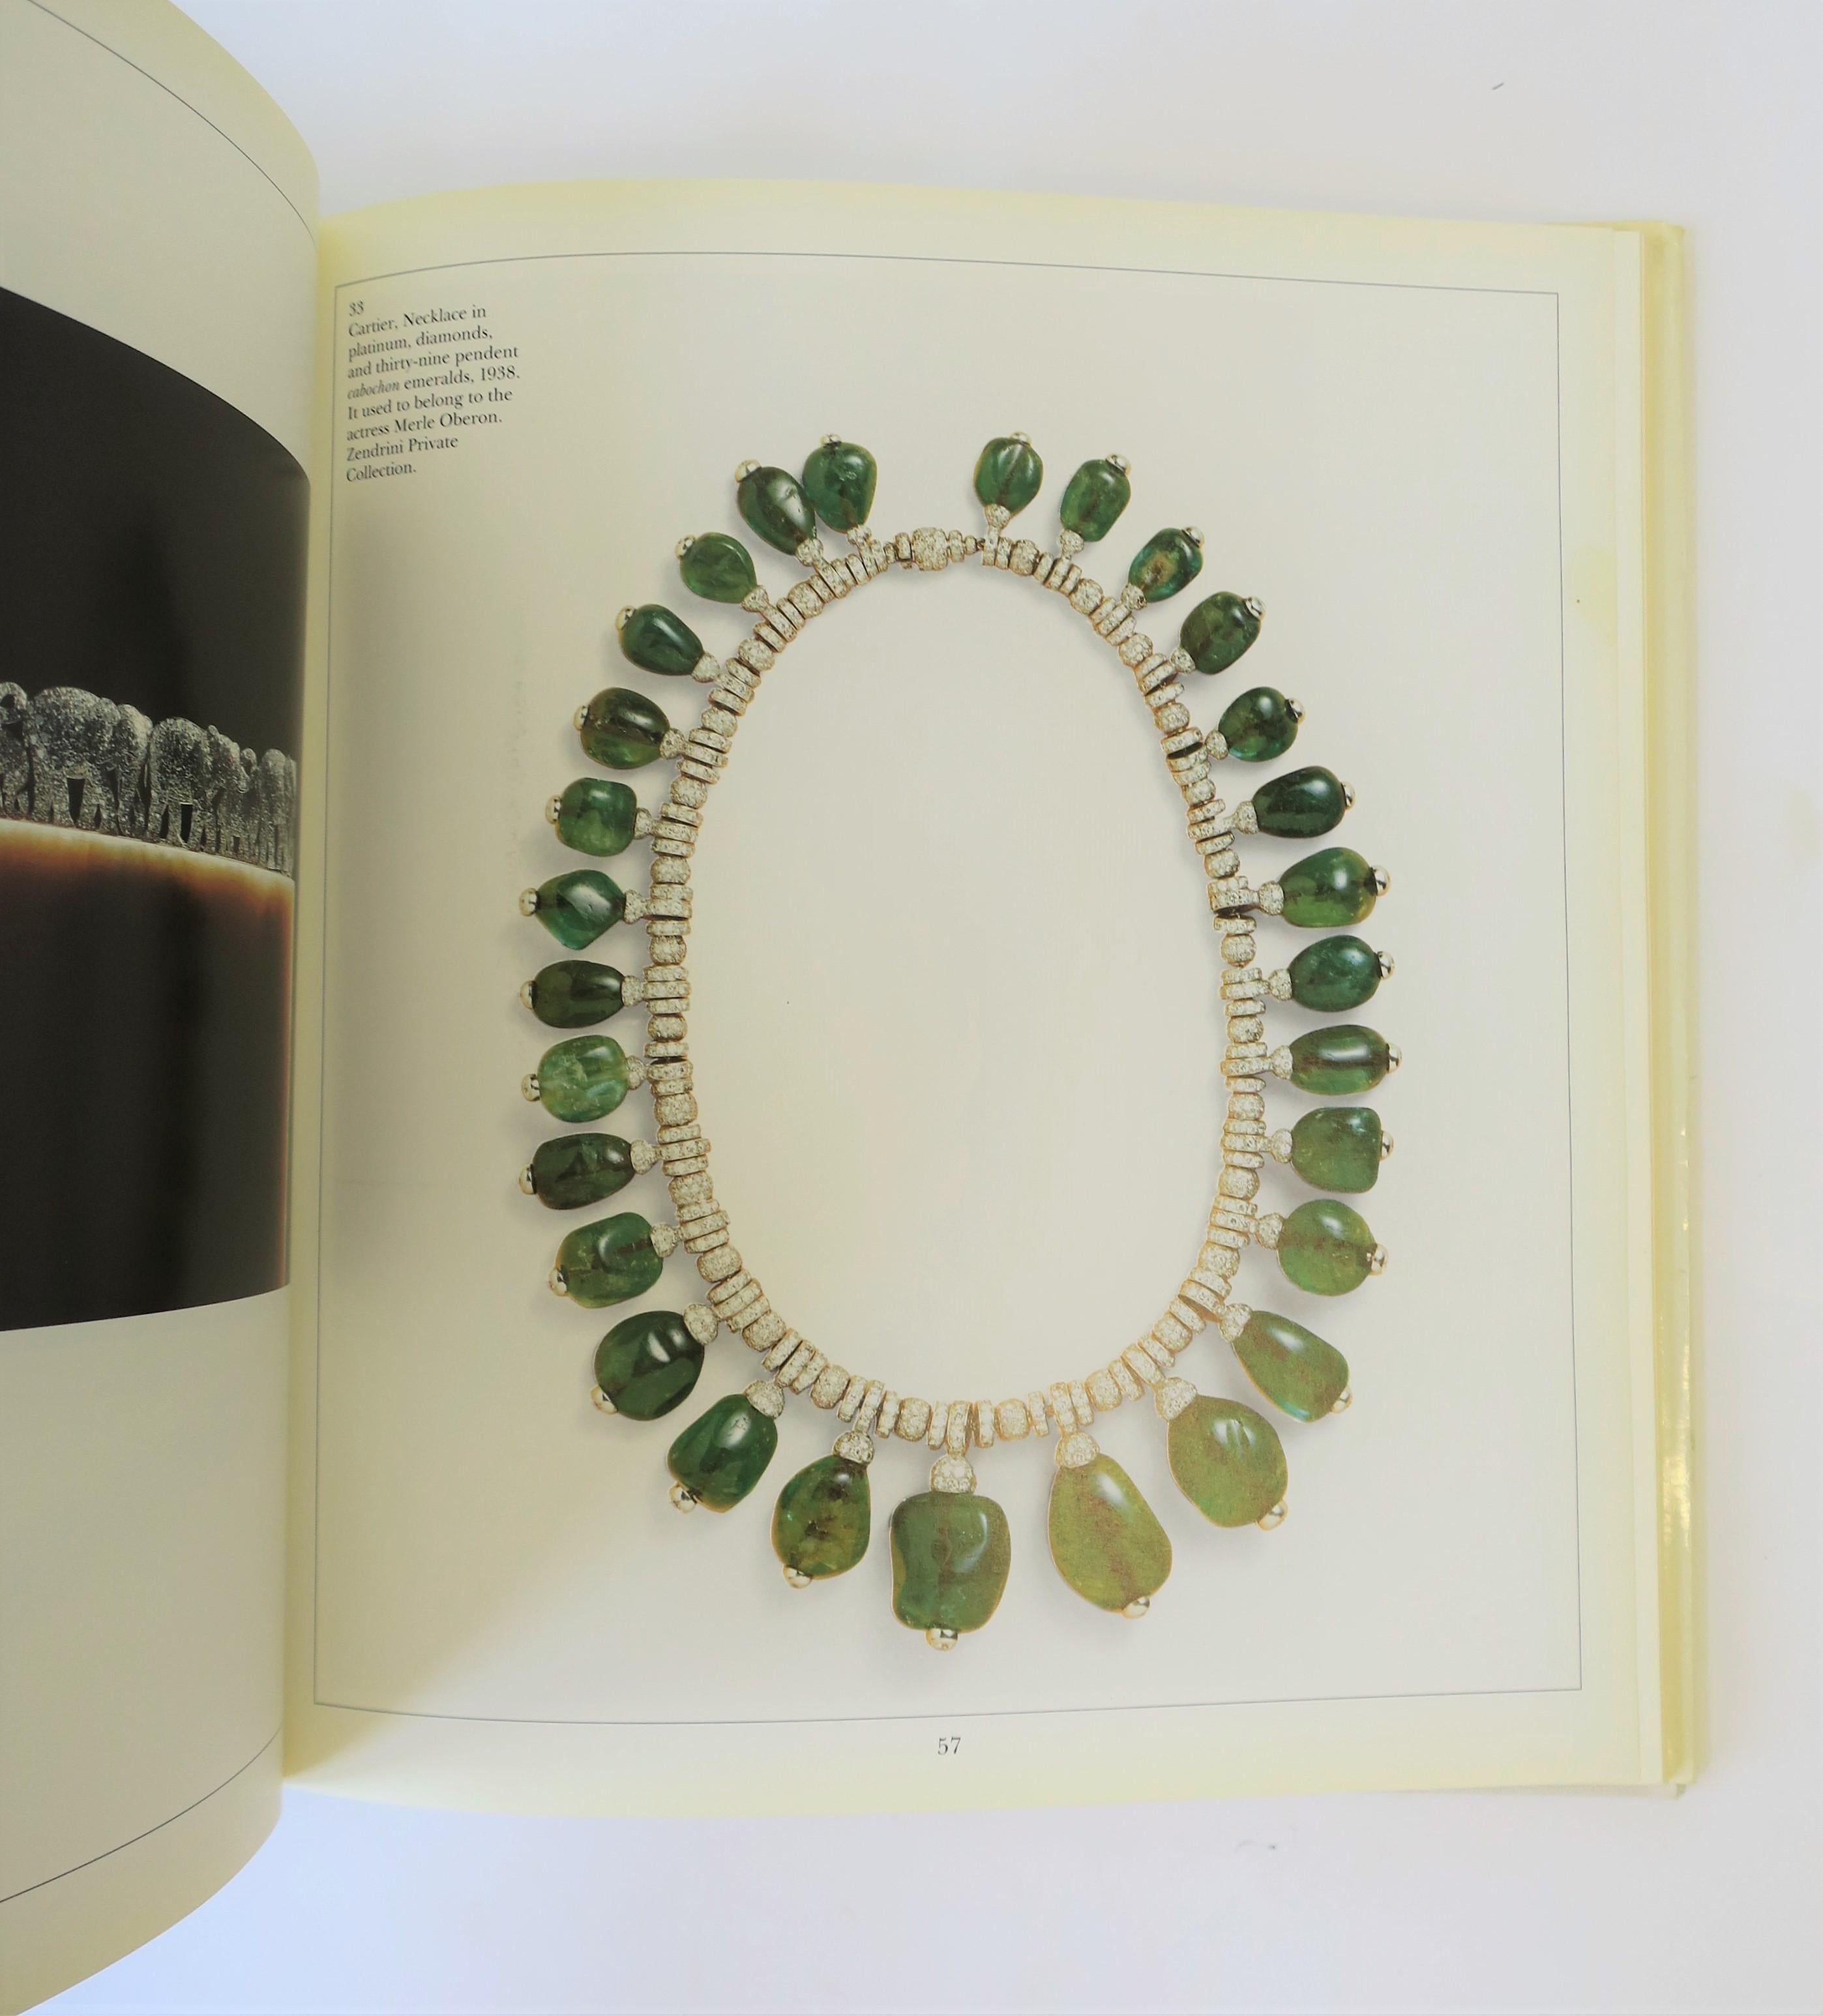 20th Century Jewelry Art Nouveau to Modern Coffee Table or Library Book, 1990s 8